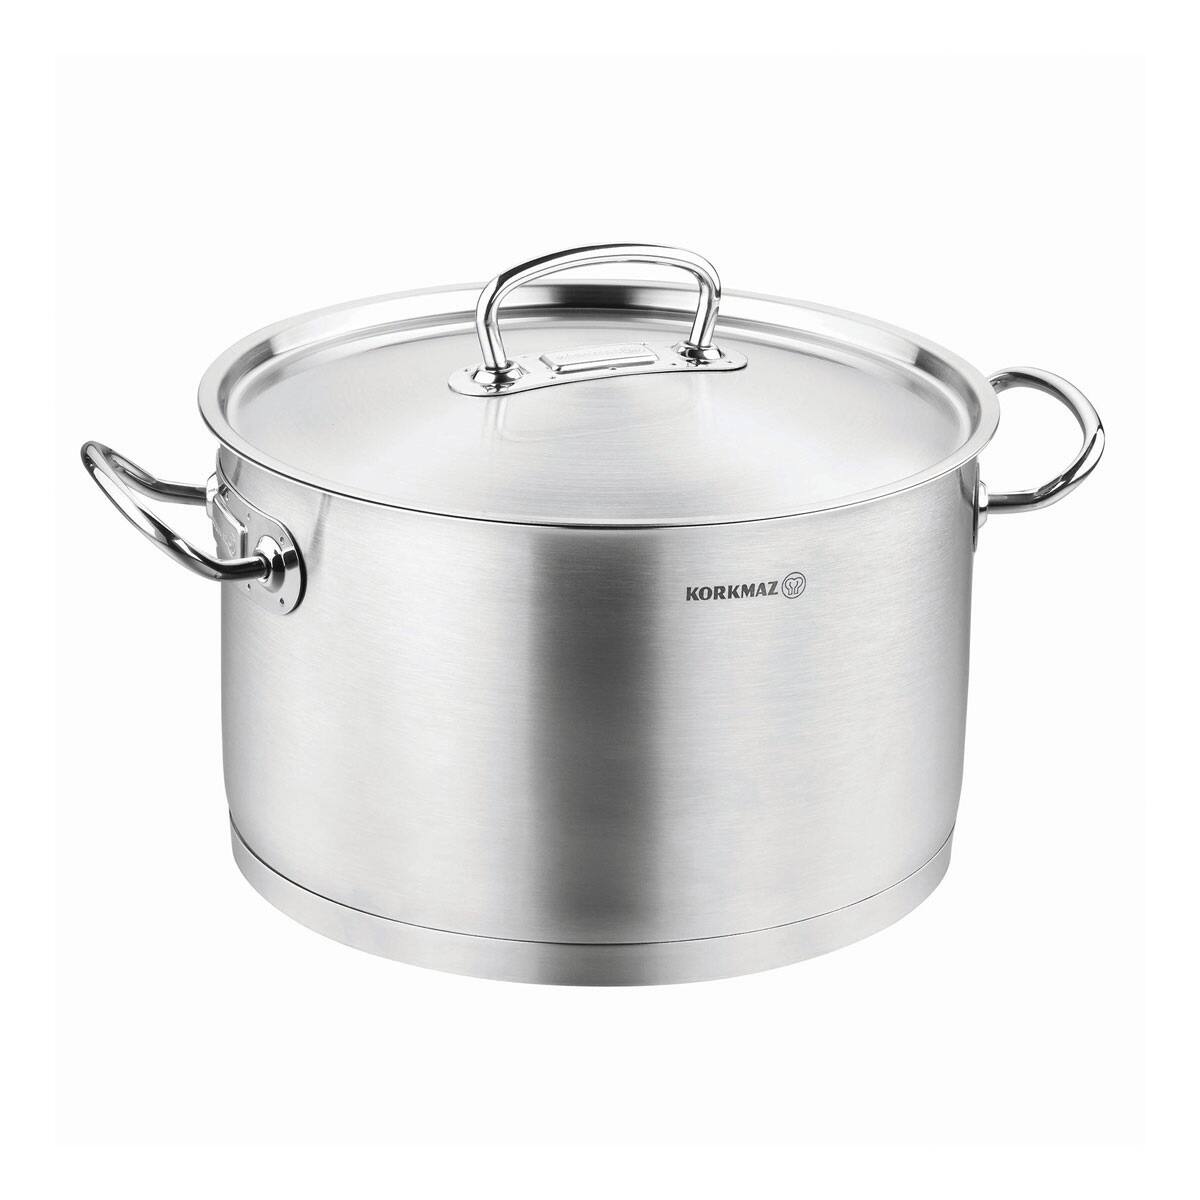 Proline 18/10 Stainless Steel Casserole Stockpot With Lid and Handles a2733 - 27 Quart